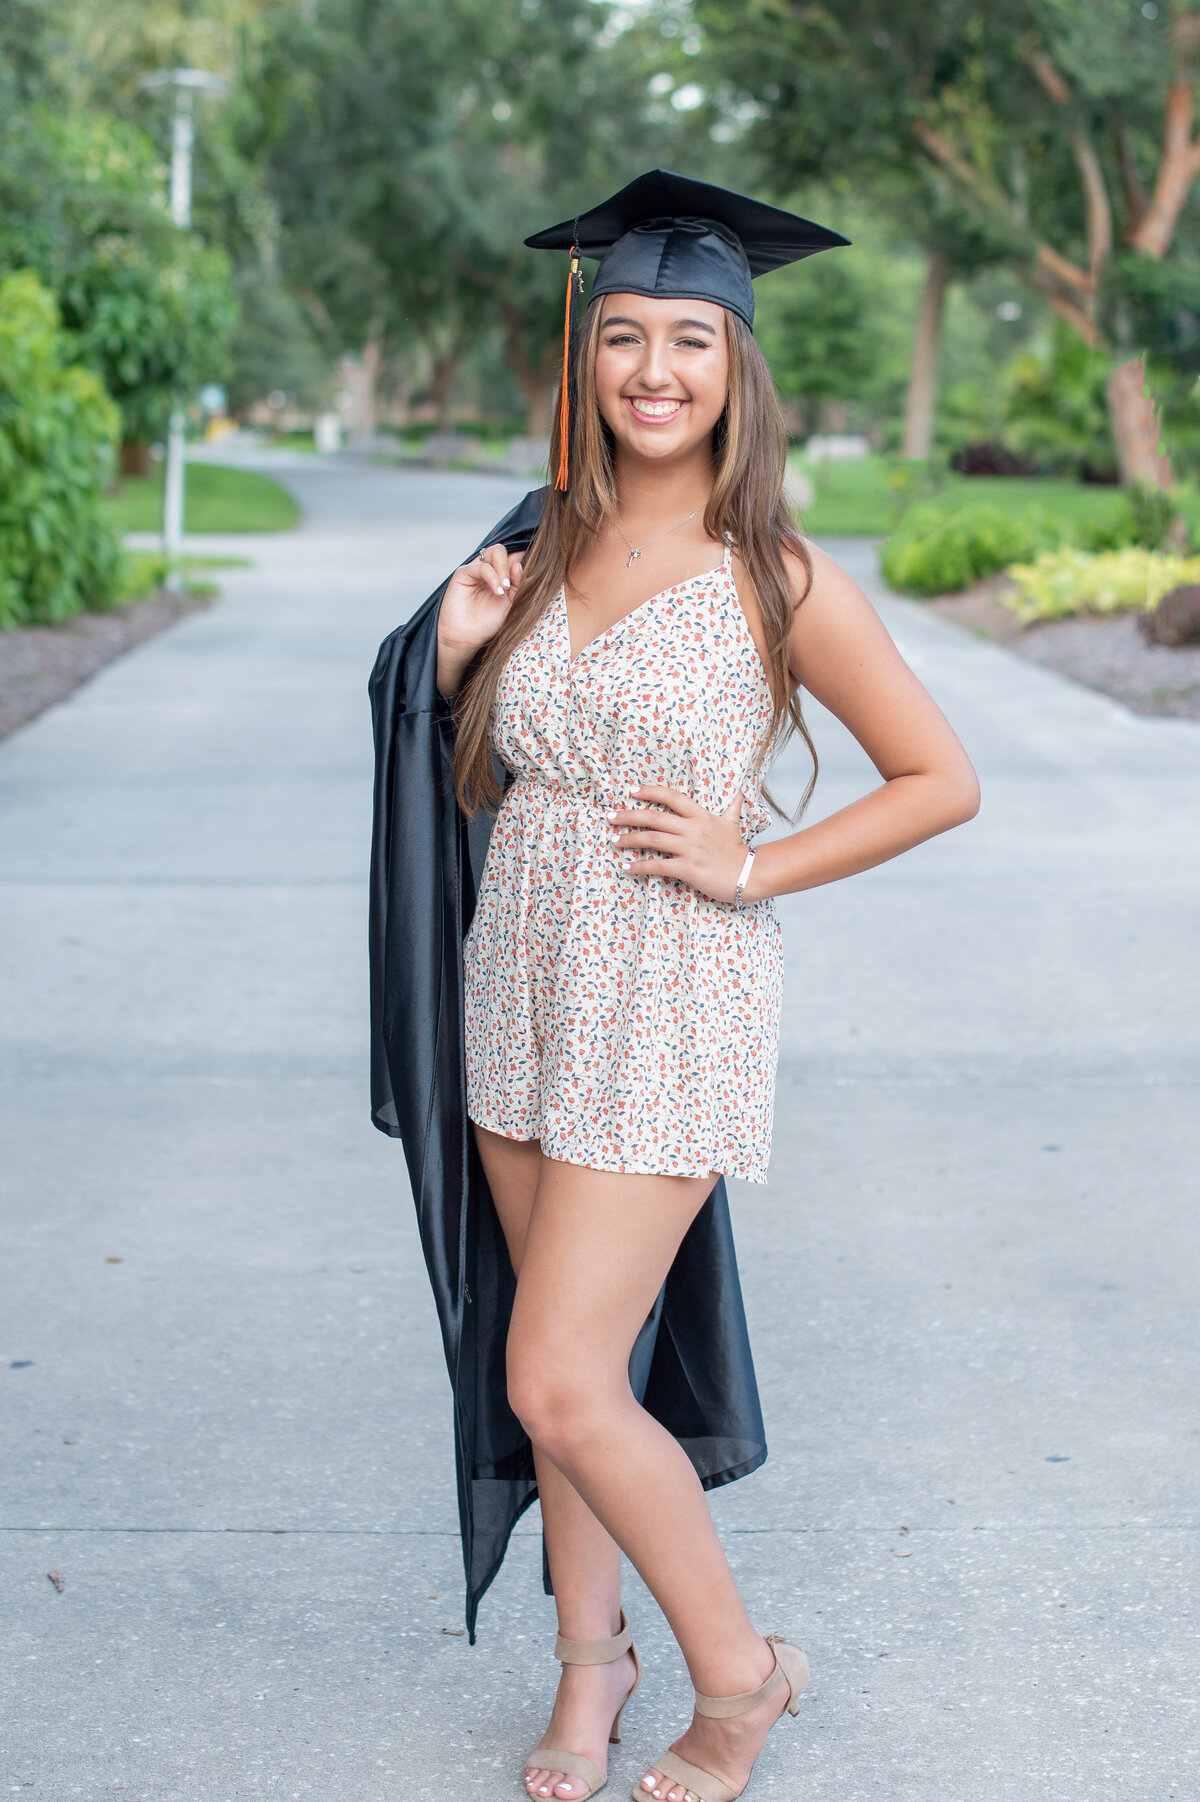 High school senior girl wearing cap holds gown over shoulder while smiling at camera.